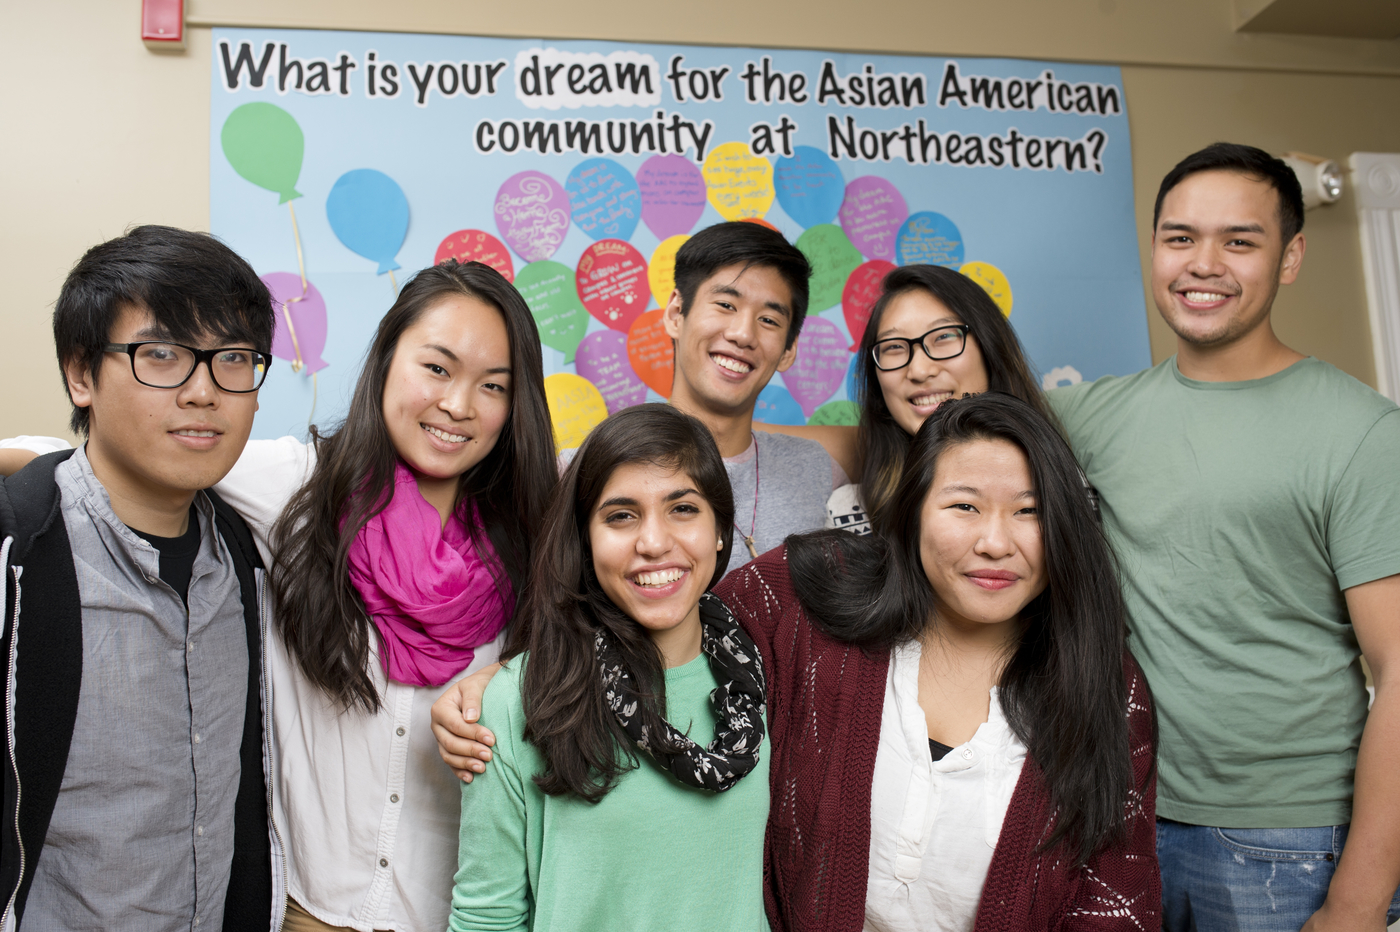 A group of 7 students at Northeastern's Asian American Center